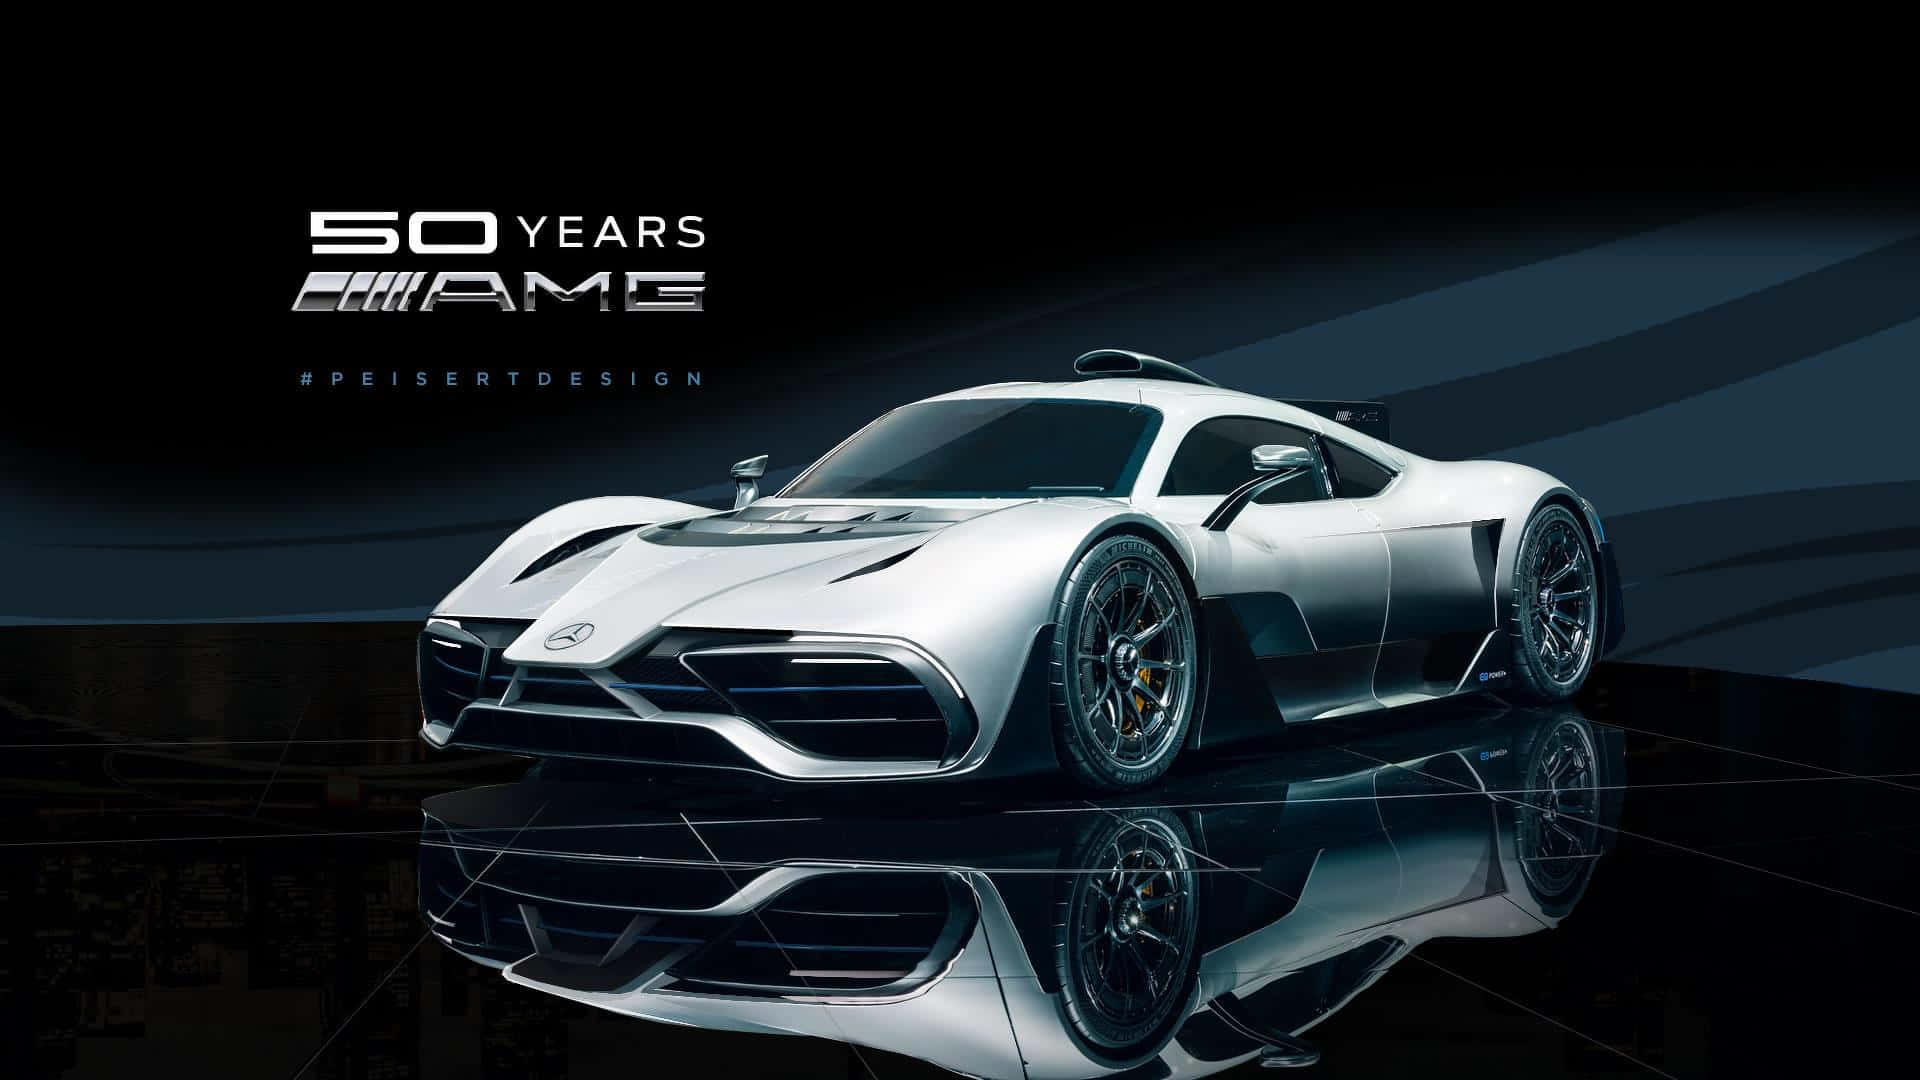 Mercedes Amg Background 50 Years